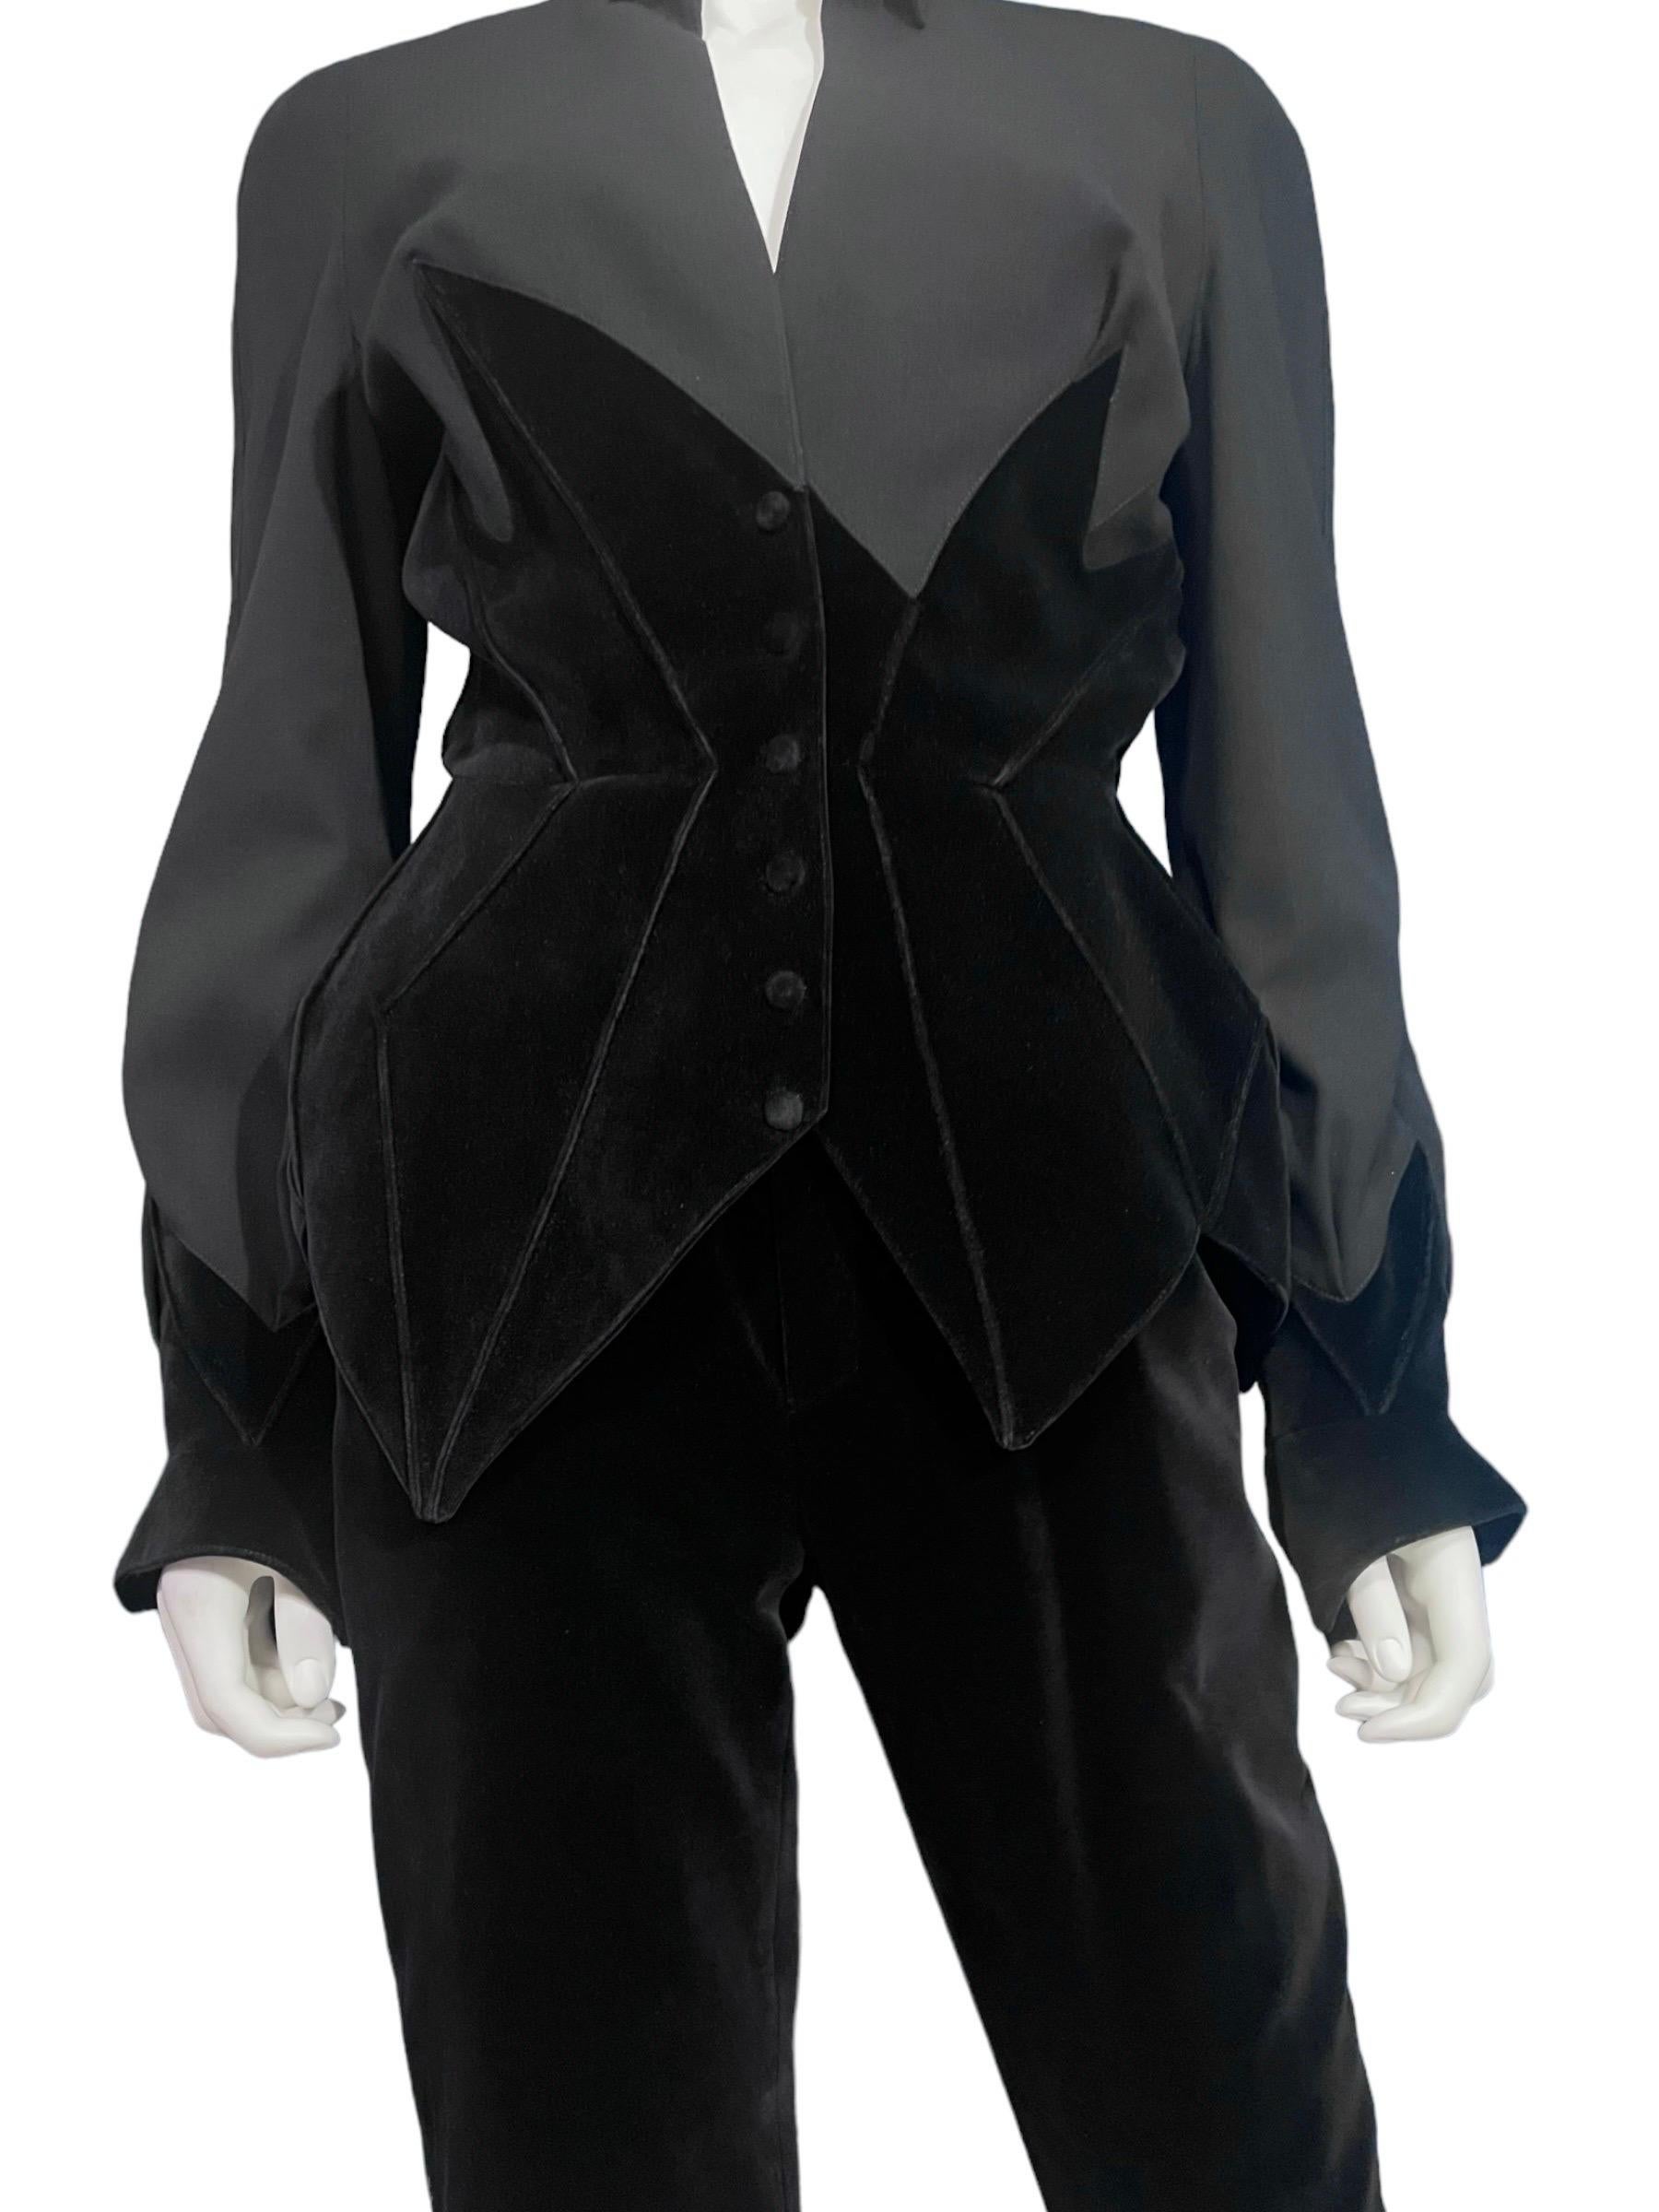 Exceptional Thierry Mugler 1990's black wool and velvet two piece pantsuit ensemble. This vintage pantsuit features a strong shoulder black wool jacket with striking contrasting velvet trim and matching velvet pants.
The jacket has jagged edge